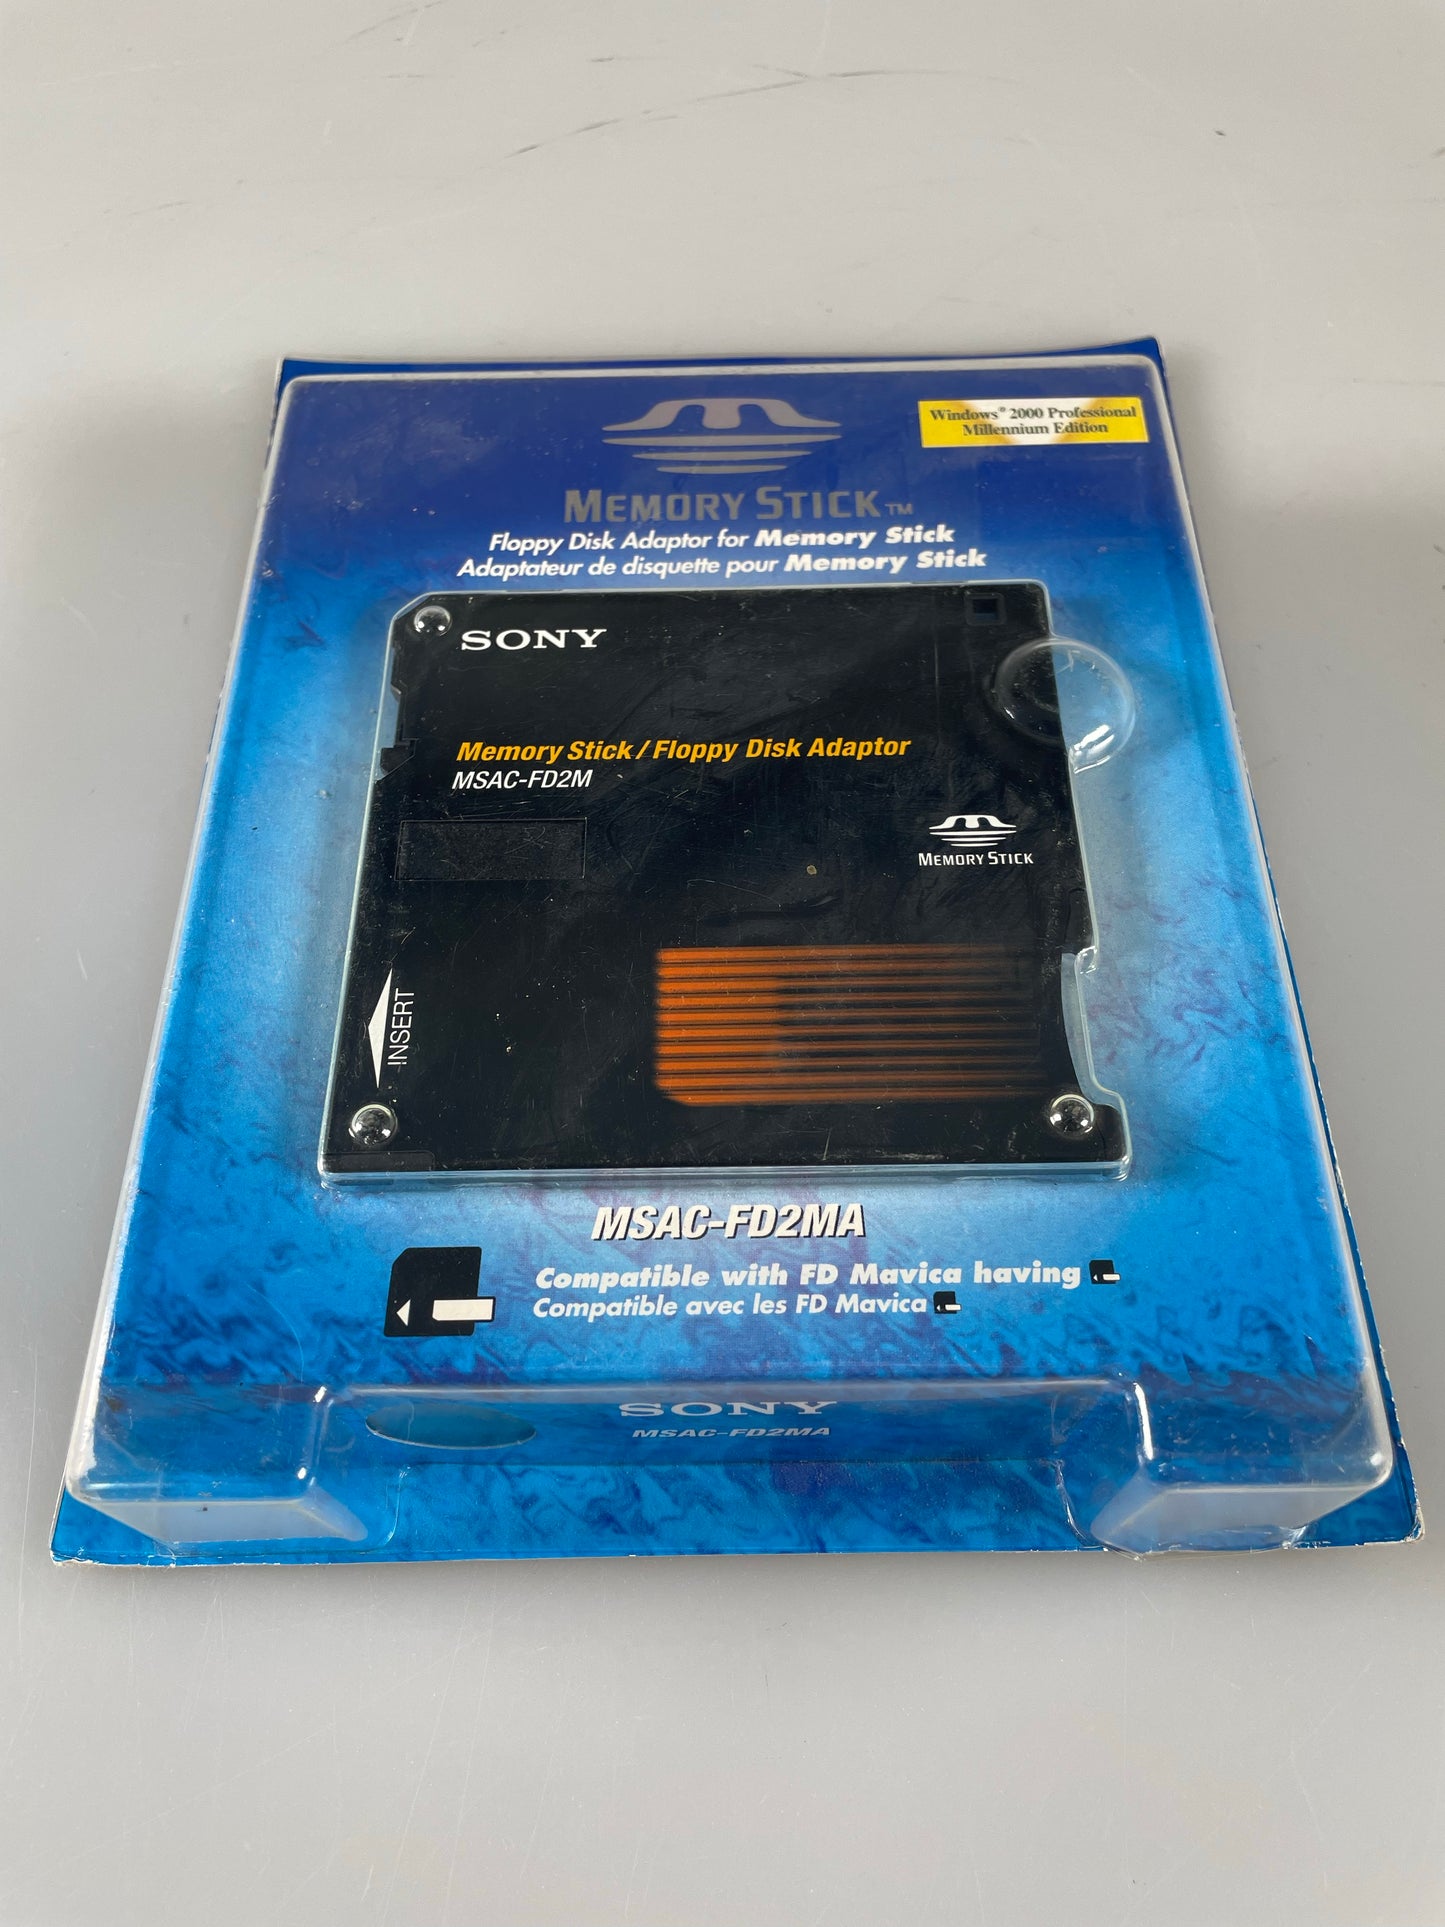 Boxed Sony MSACFD2M Floppy Disc Interface Adapter for Memory Stick (MSAC-FD2MA)